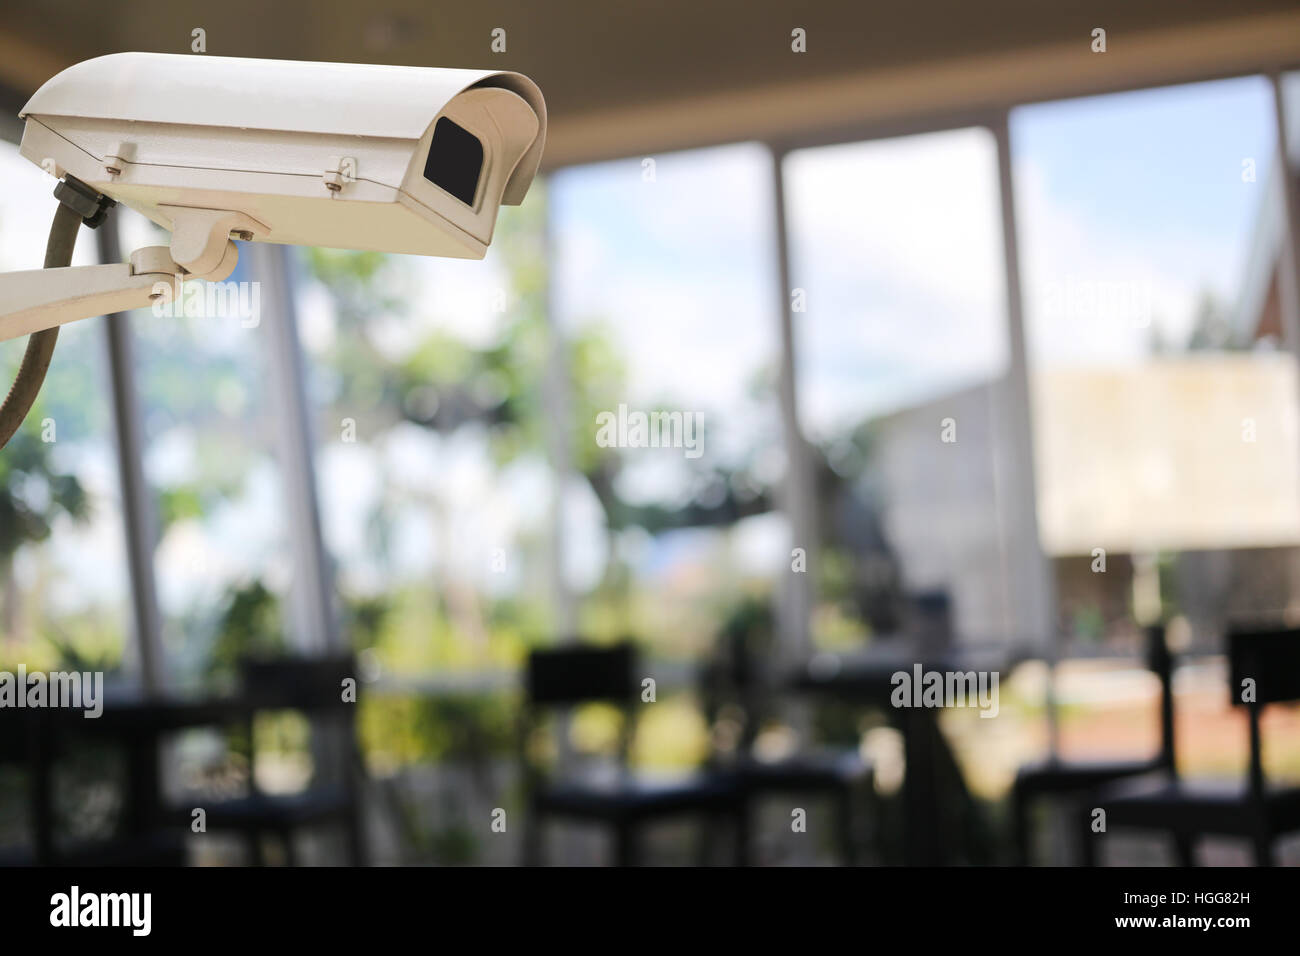 CCTV Camera Record on blur background of people in the cafe,concept of security and safety. Stock Photo